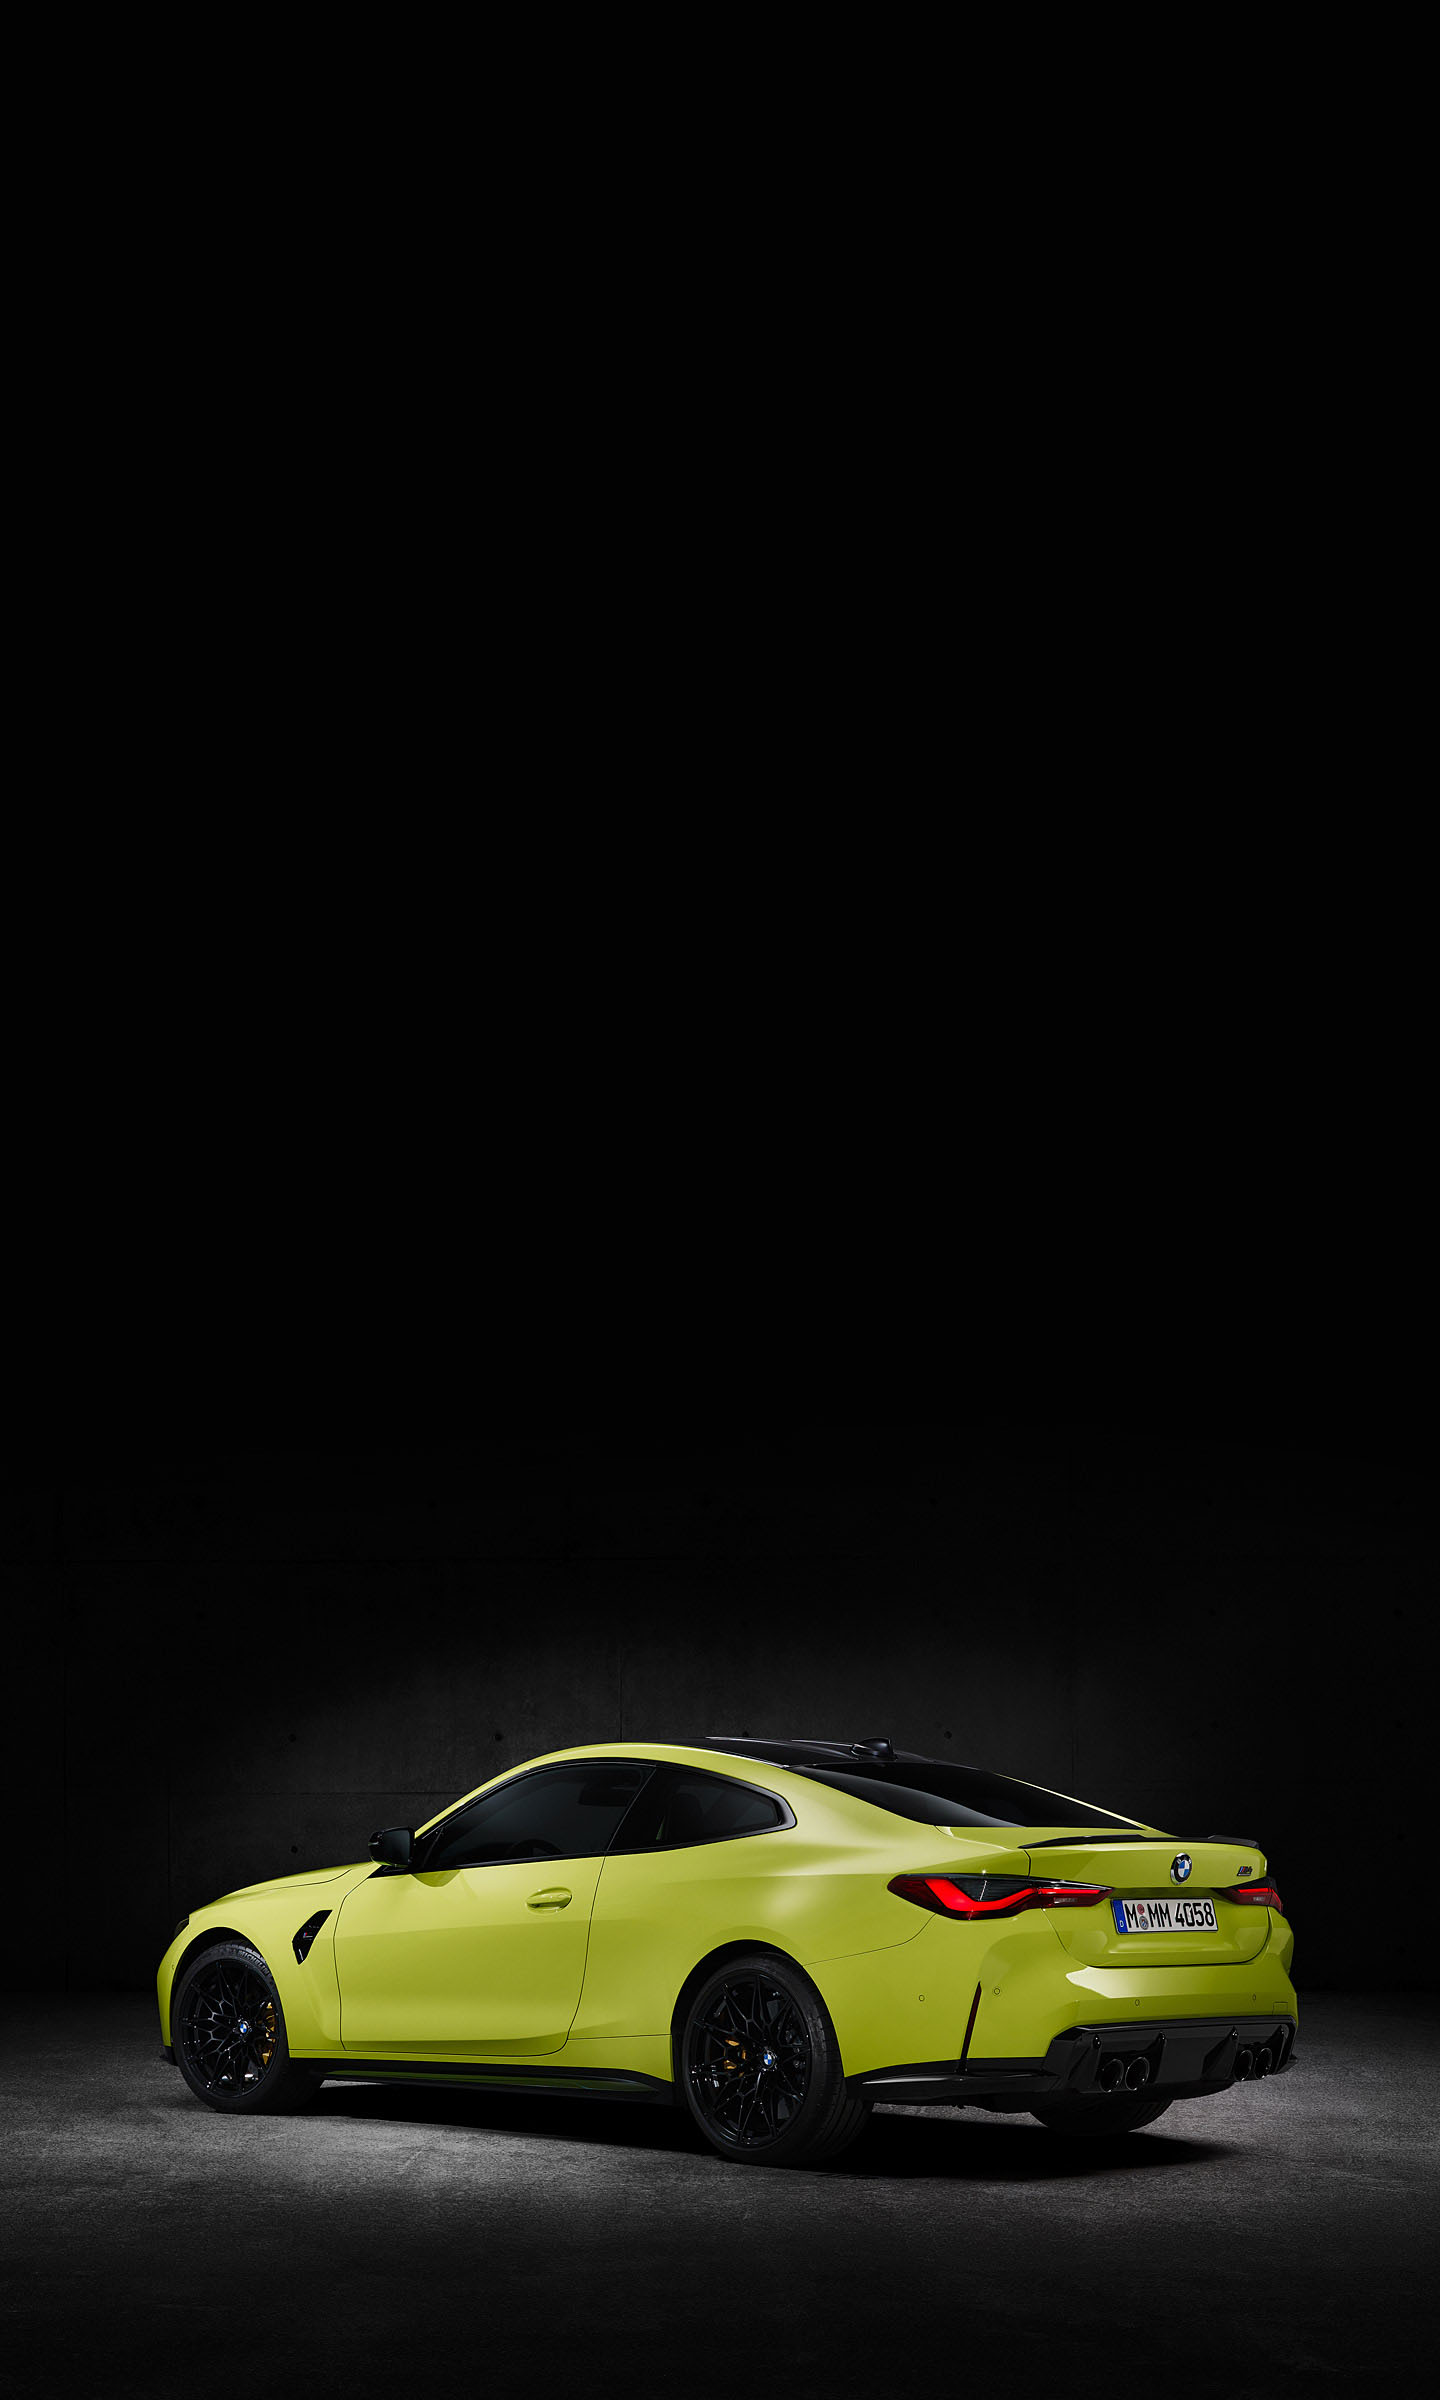  2021 BMW M4 Competition Wallpaper.